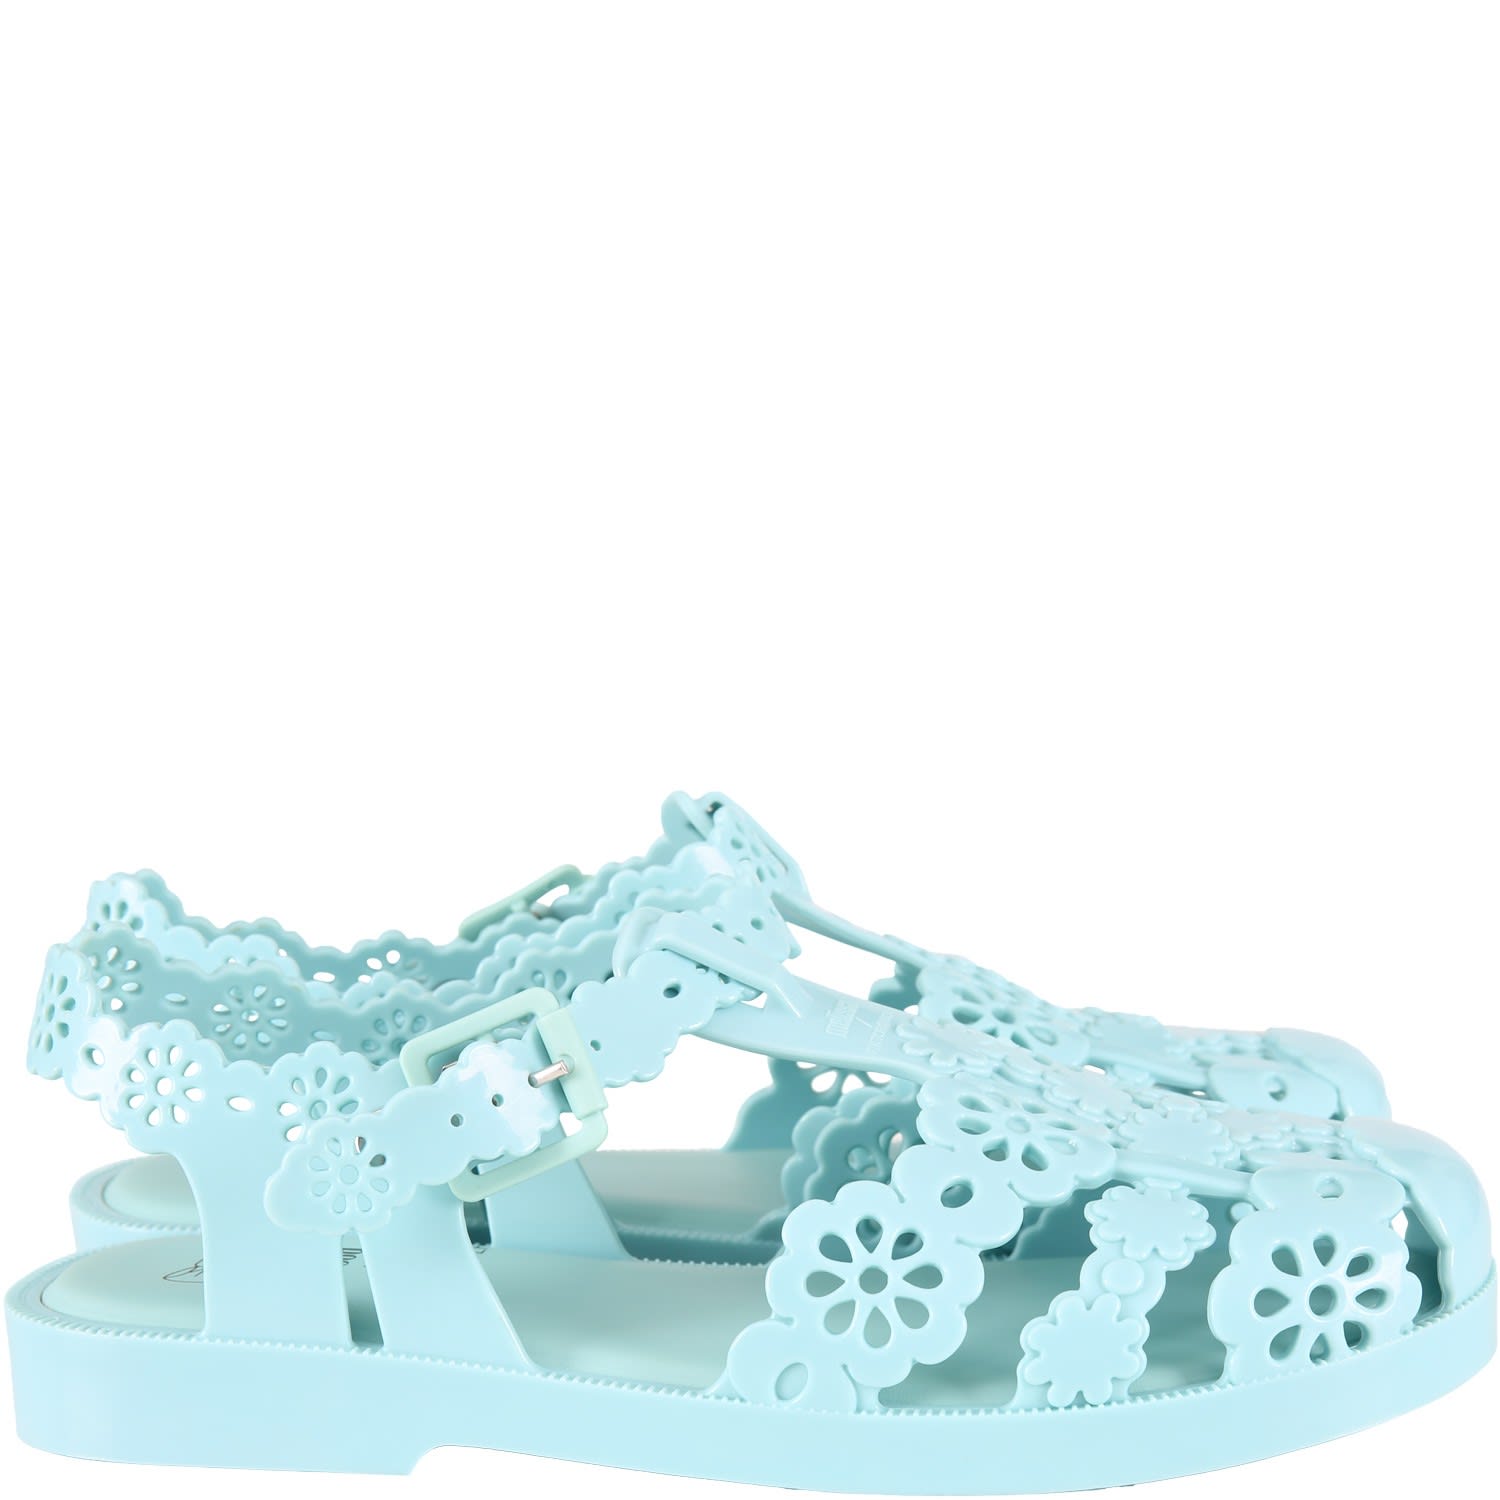 Melissa Teal Spider Shoes For Woman